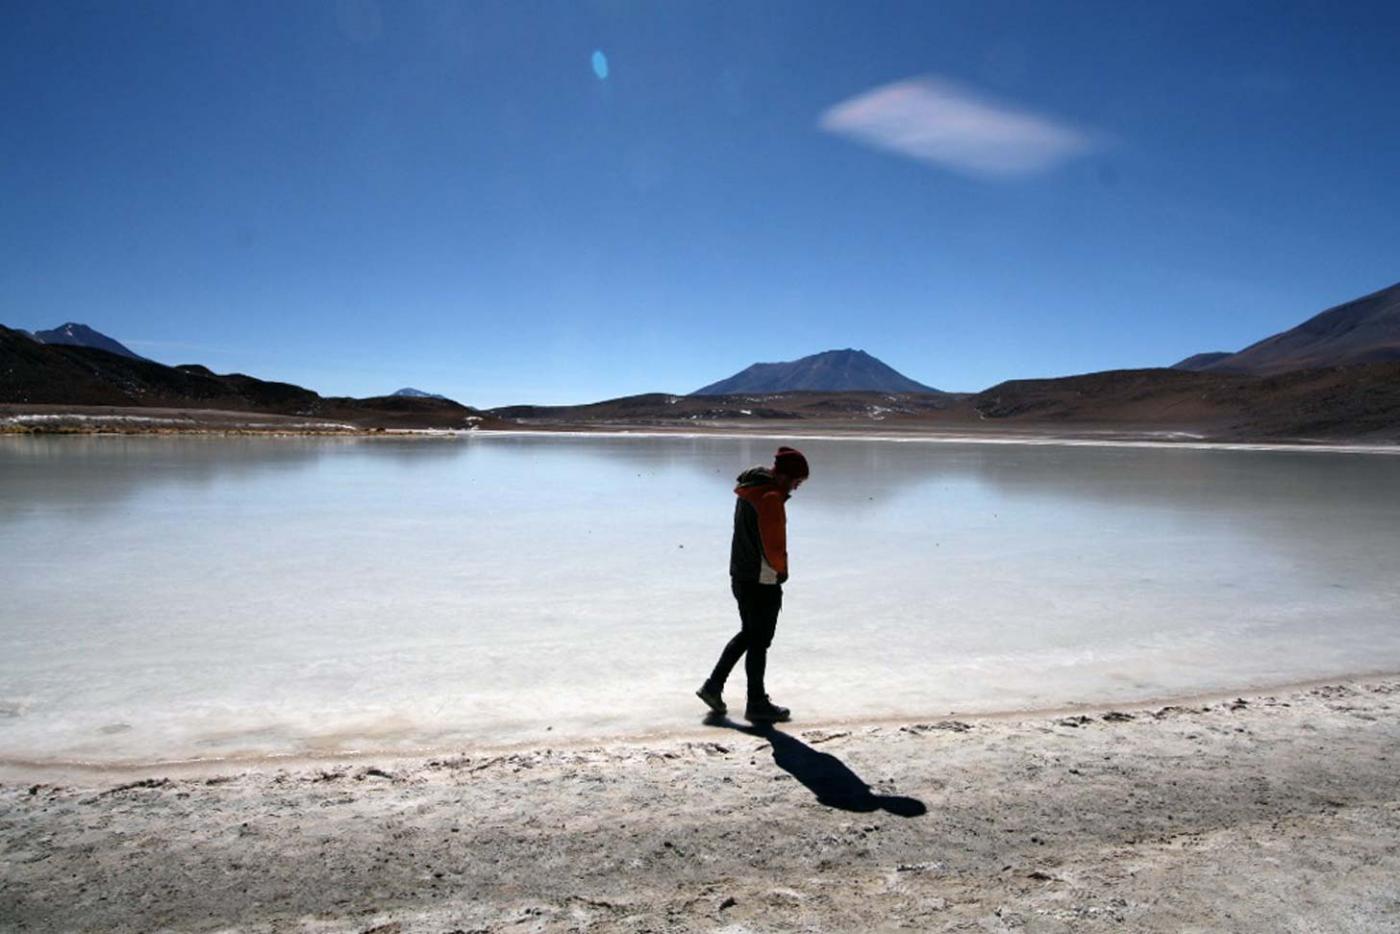 Is this the loneliest man in the world? Certainly the loneliest man on the Bolivian Salt Flats